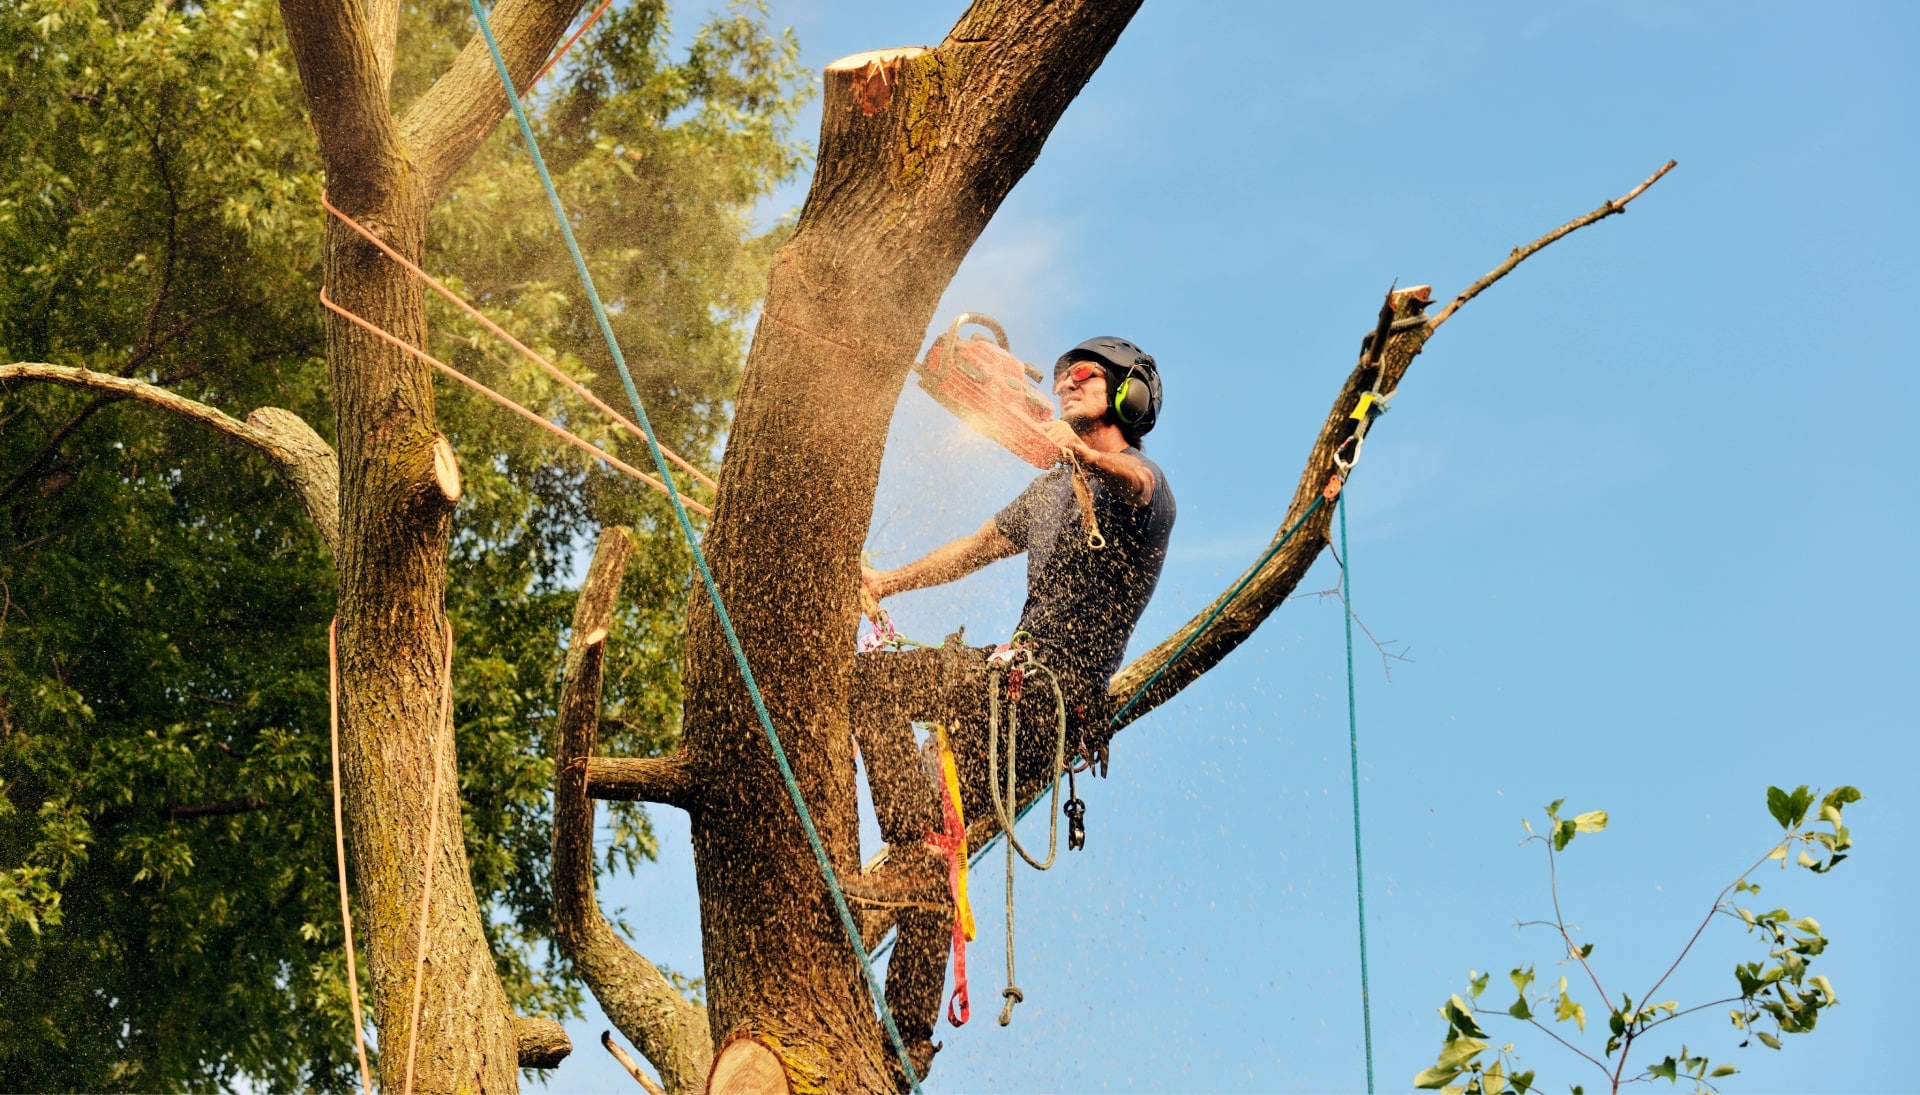 Livingston tree removal experts solve tree issues.